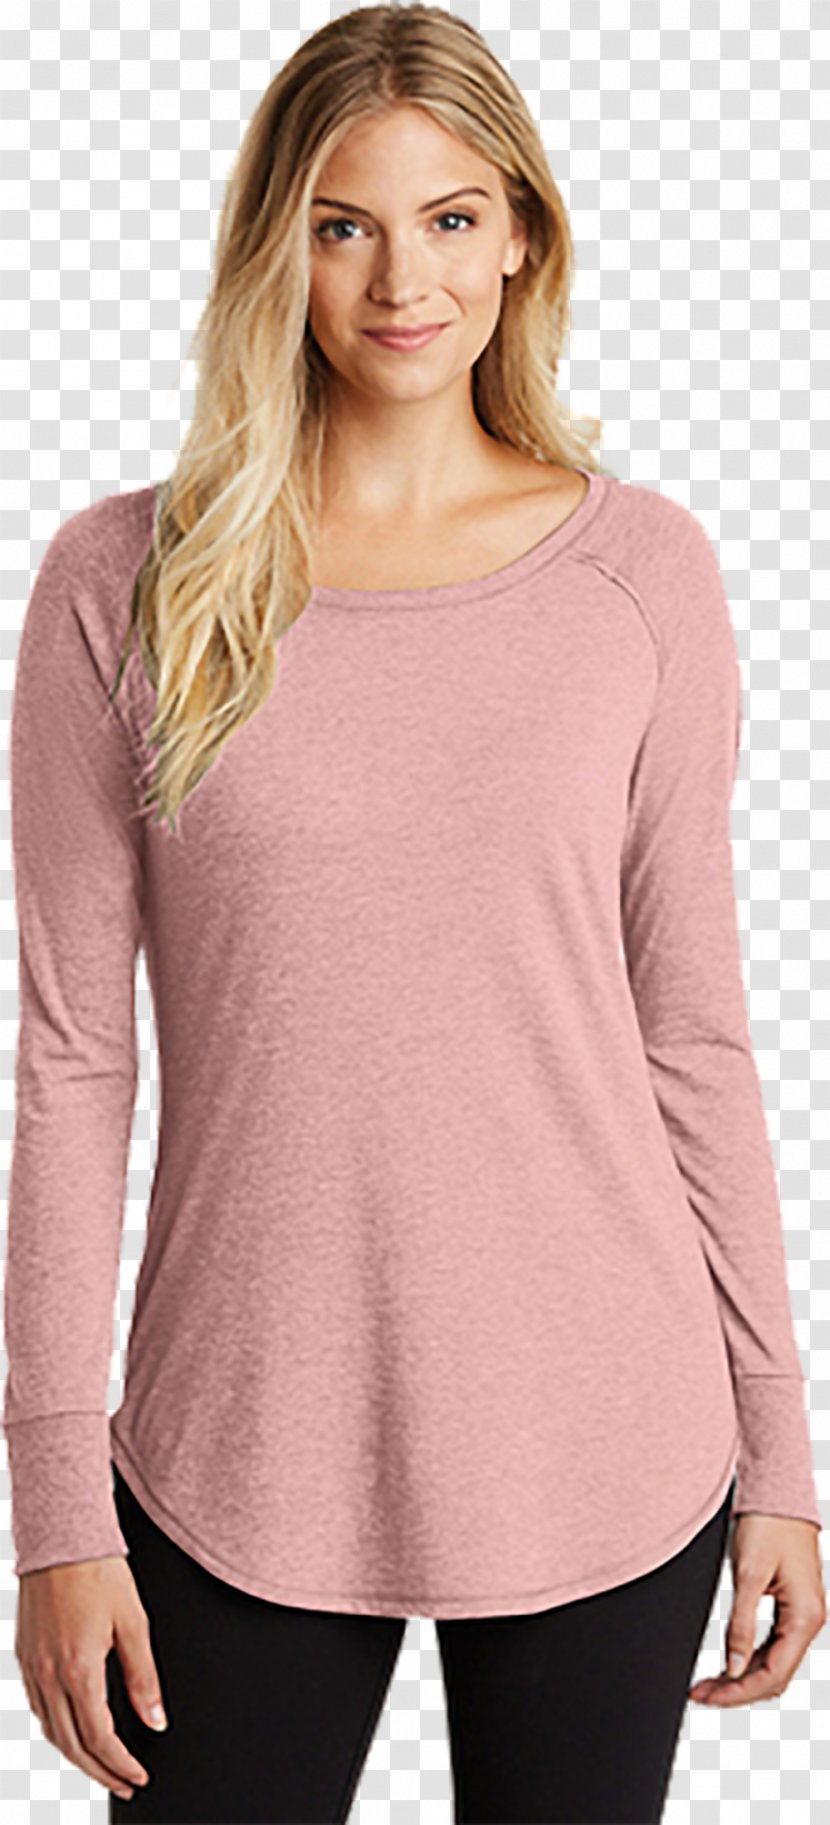 Long-sleeved T-shirt Hoodie Clothing - Cuff Transparent PNG